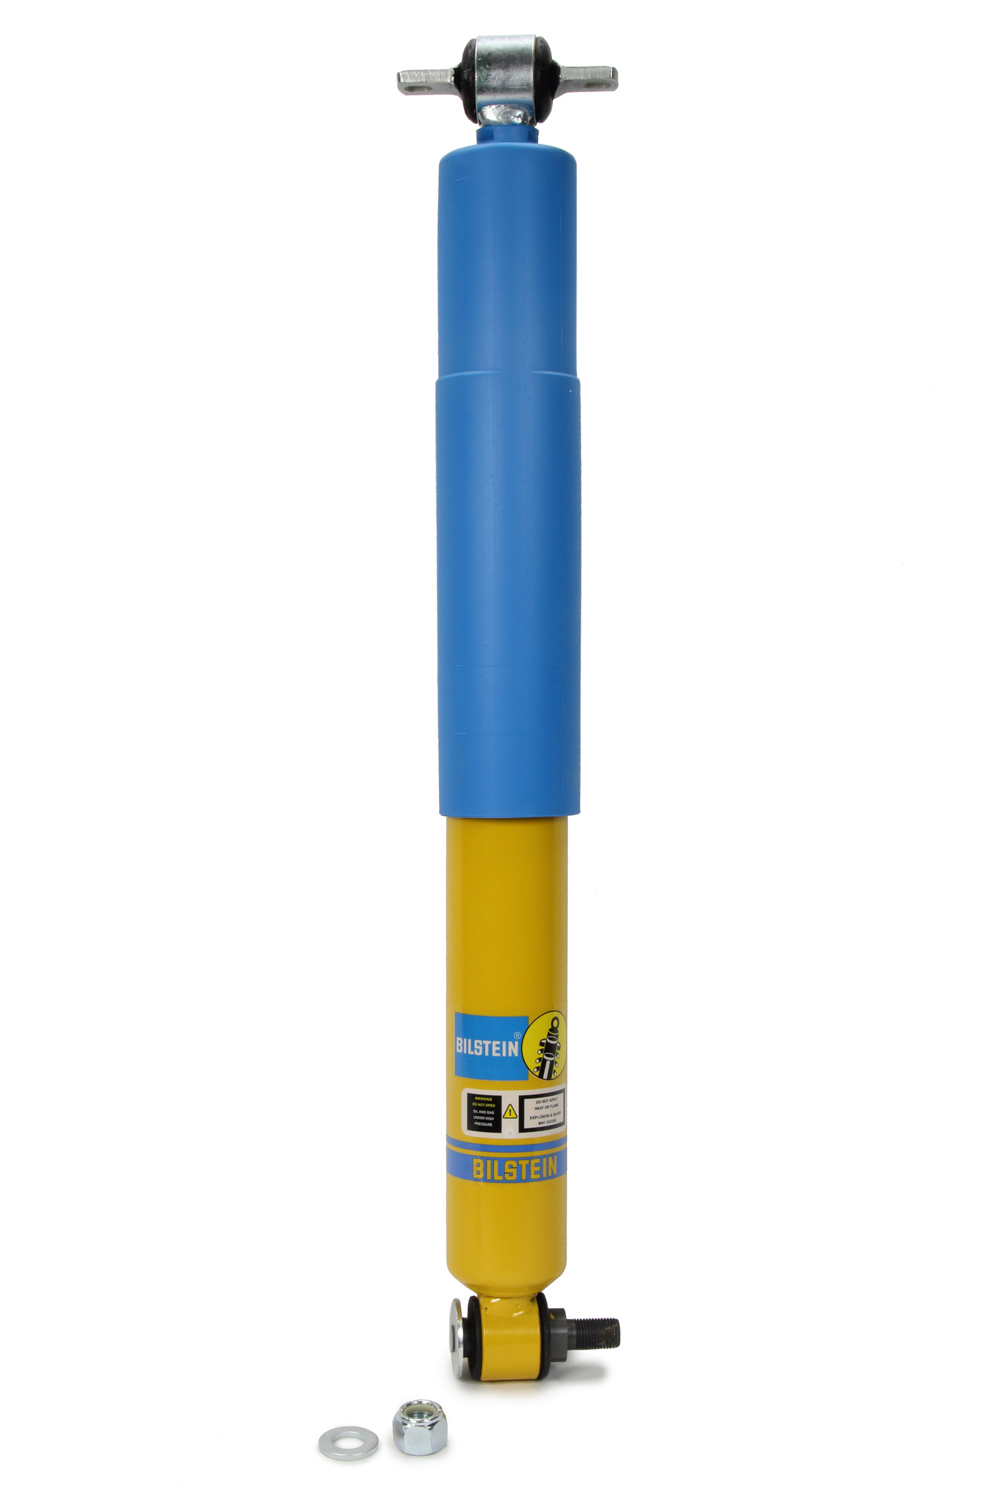 Bilstein 24-291699 Shock, AK Series, Monotube, 13.11 in Compressed / 20.31 in Extended, Digressive, Steel, Yellow Paint, Rear, Street Stock, Each